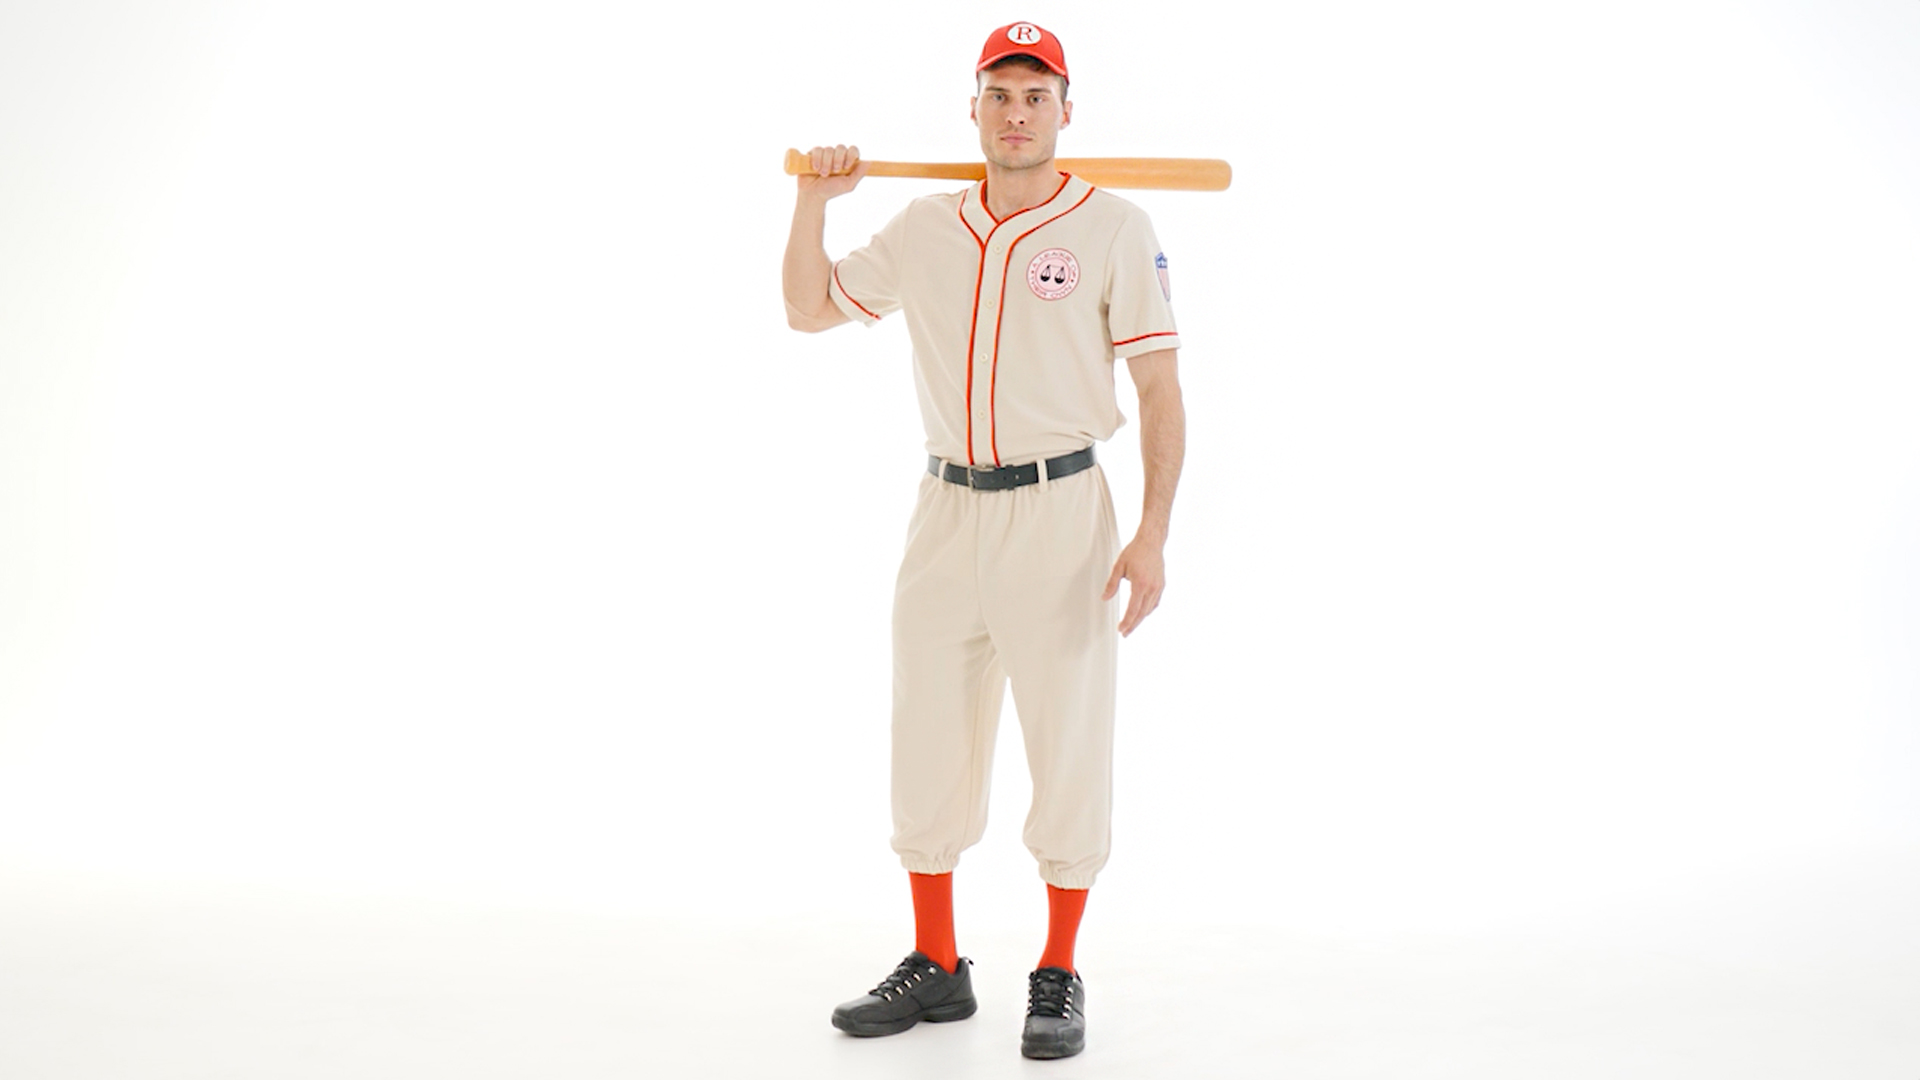 Step into the role played by Tom Hanks in A League of Their Own with this officially licensed Coach Jimmy costume! This is an exclusive costume.